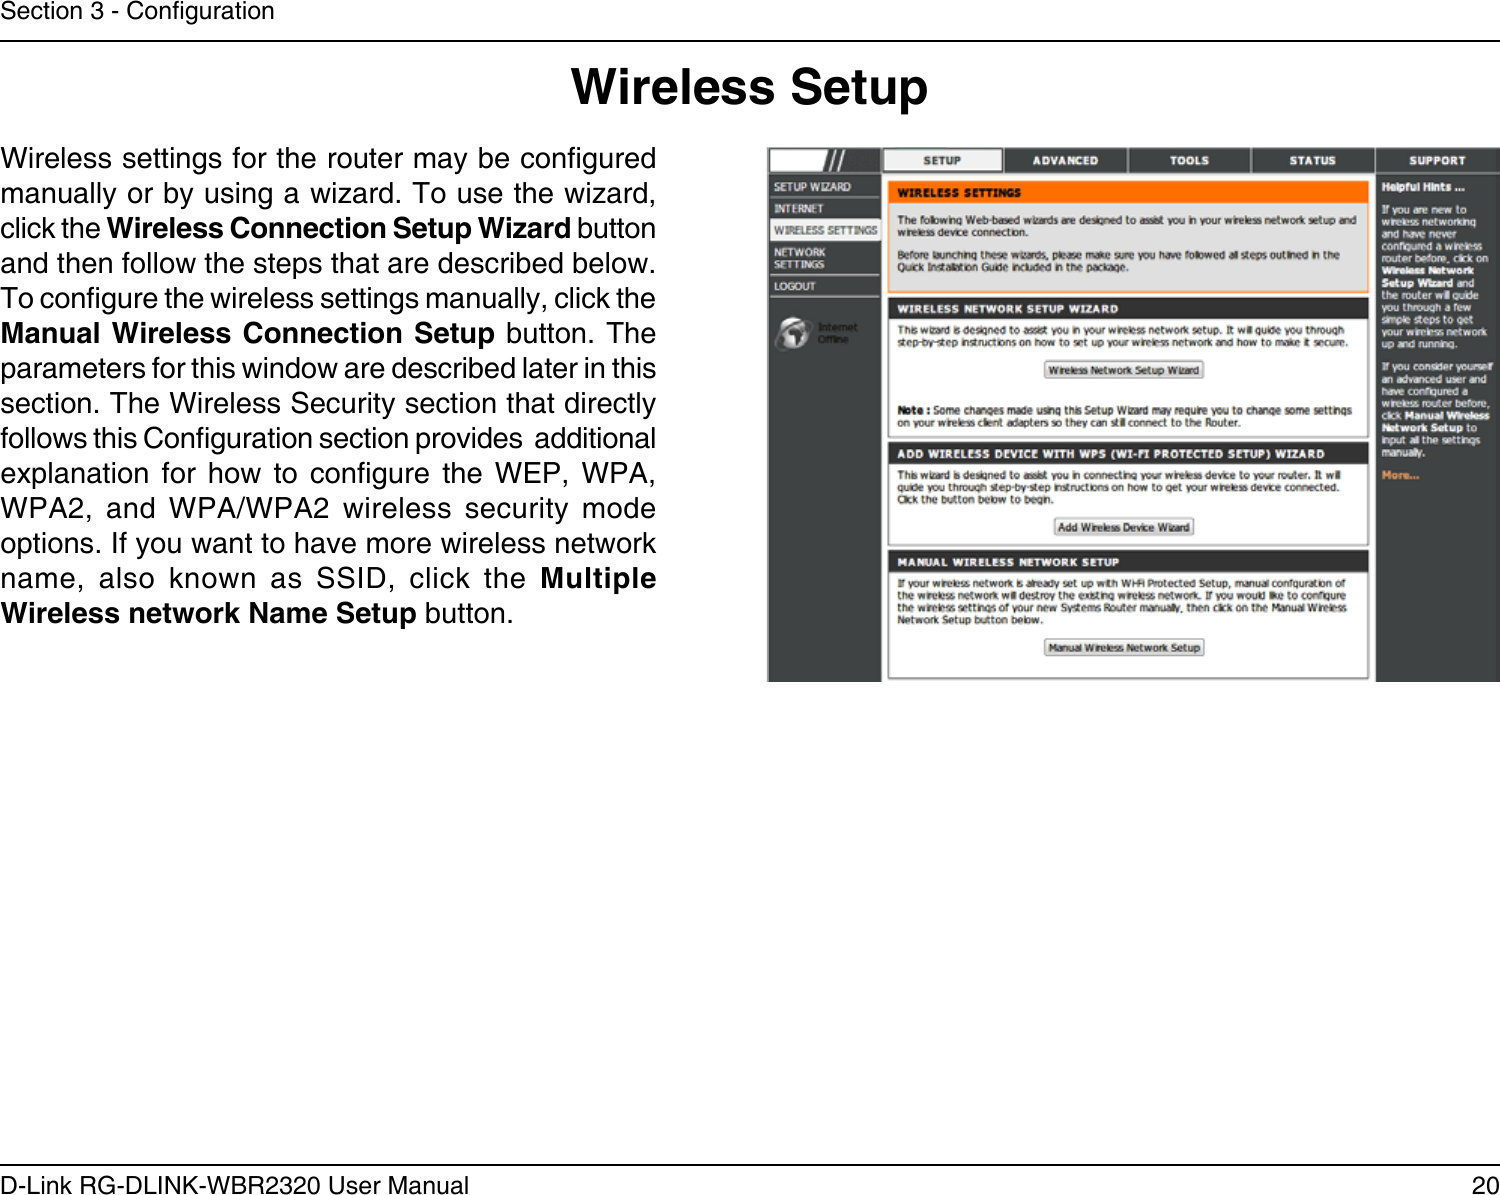 20D-Link RG-DLINK-WBR2320 User ManualSection 3 - CongurationWireless SetupWireless settings for the router may be congured manually or by using a wizard. To use the wizard, click the Wireless Connection Setup Wizard button and then follow the steps that are described below. To congure the wireless settings manually, click the Manual Wireless Connection Setup button. The parameters for this window are described later in this section. The Wireless Security section that directly follows this Conguration section provides  additional explanation  for  how  to  congure  the  WEP,  WPA, WPA2,  and  WPA/WPA2  wireless  security  mode options. If you want to have more wireless network name,  also  known  as  SSID,  click  the  Multiple Wireless network Name Setup button.